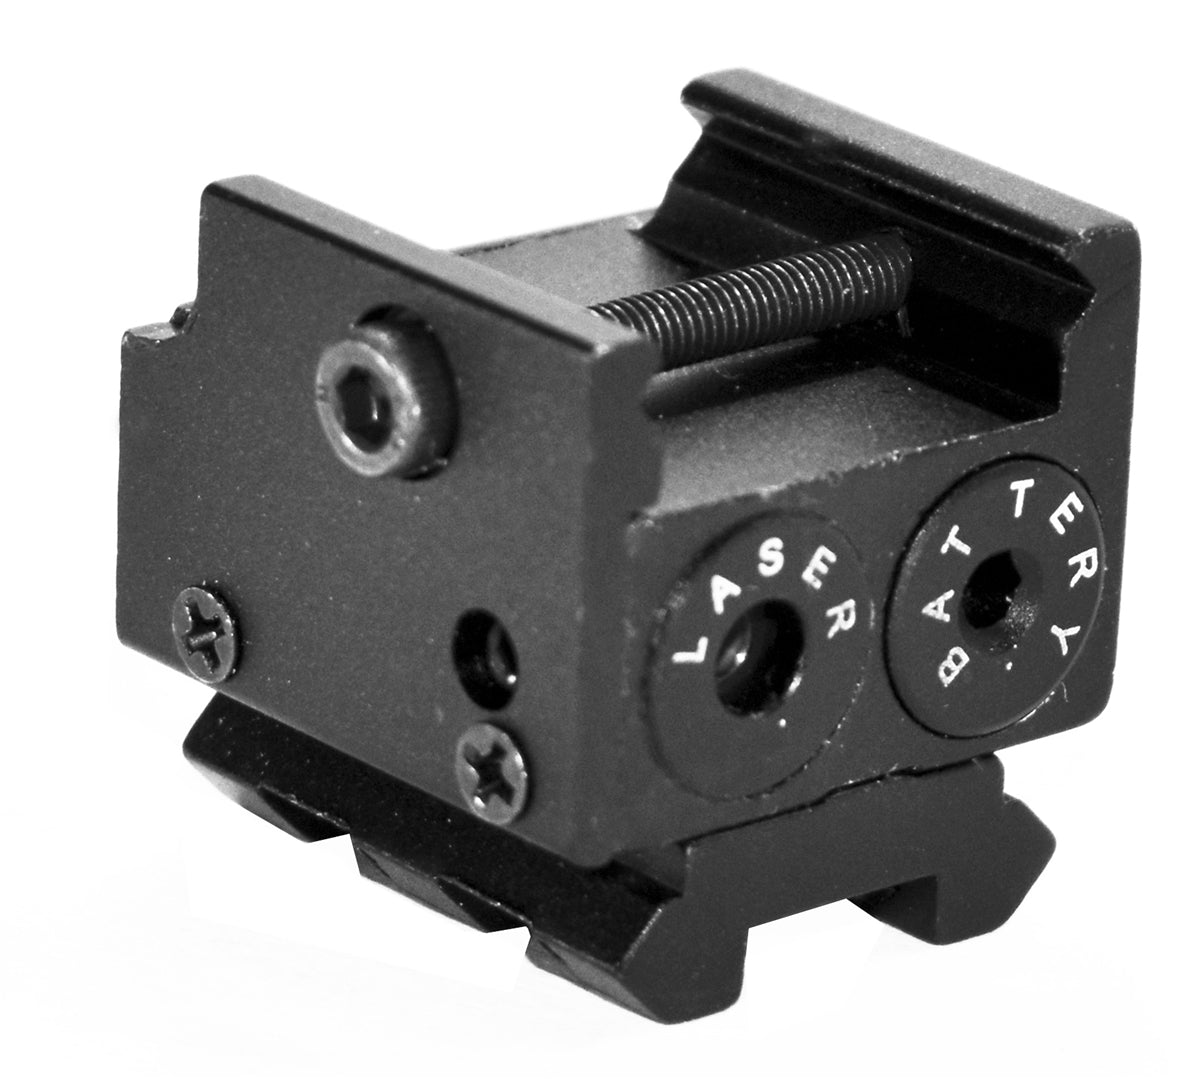 Trinity Compact red dot Sight for fn 509 Tactical Optics Home Defense Accessory Picatinny Weaver Mount Adapter Aluminum Black.